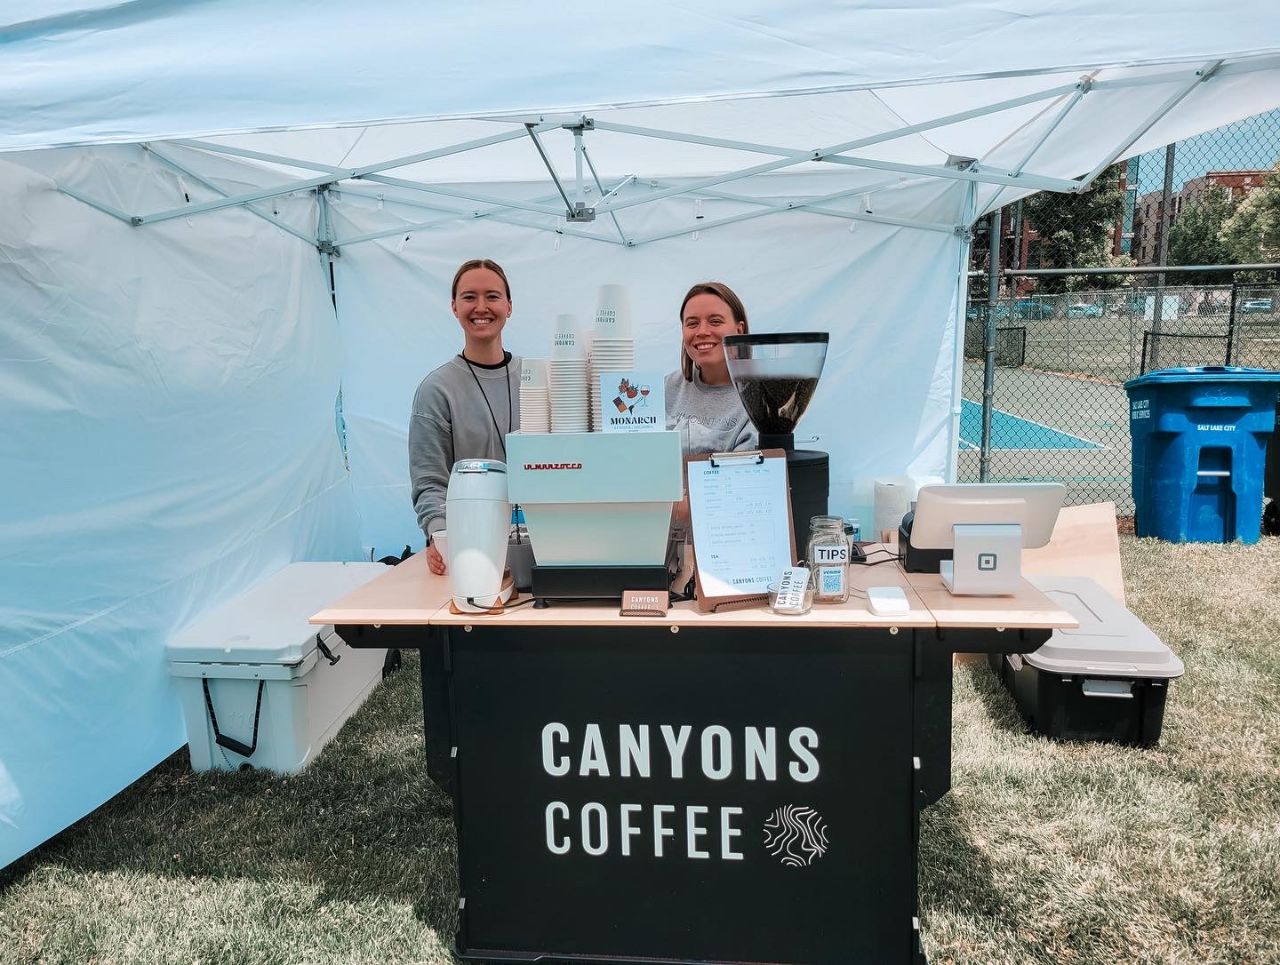 Canyons Coffee Cart at the 2022 IFSC Climbing World Cup in Salt Lake City